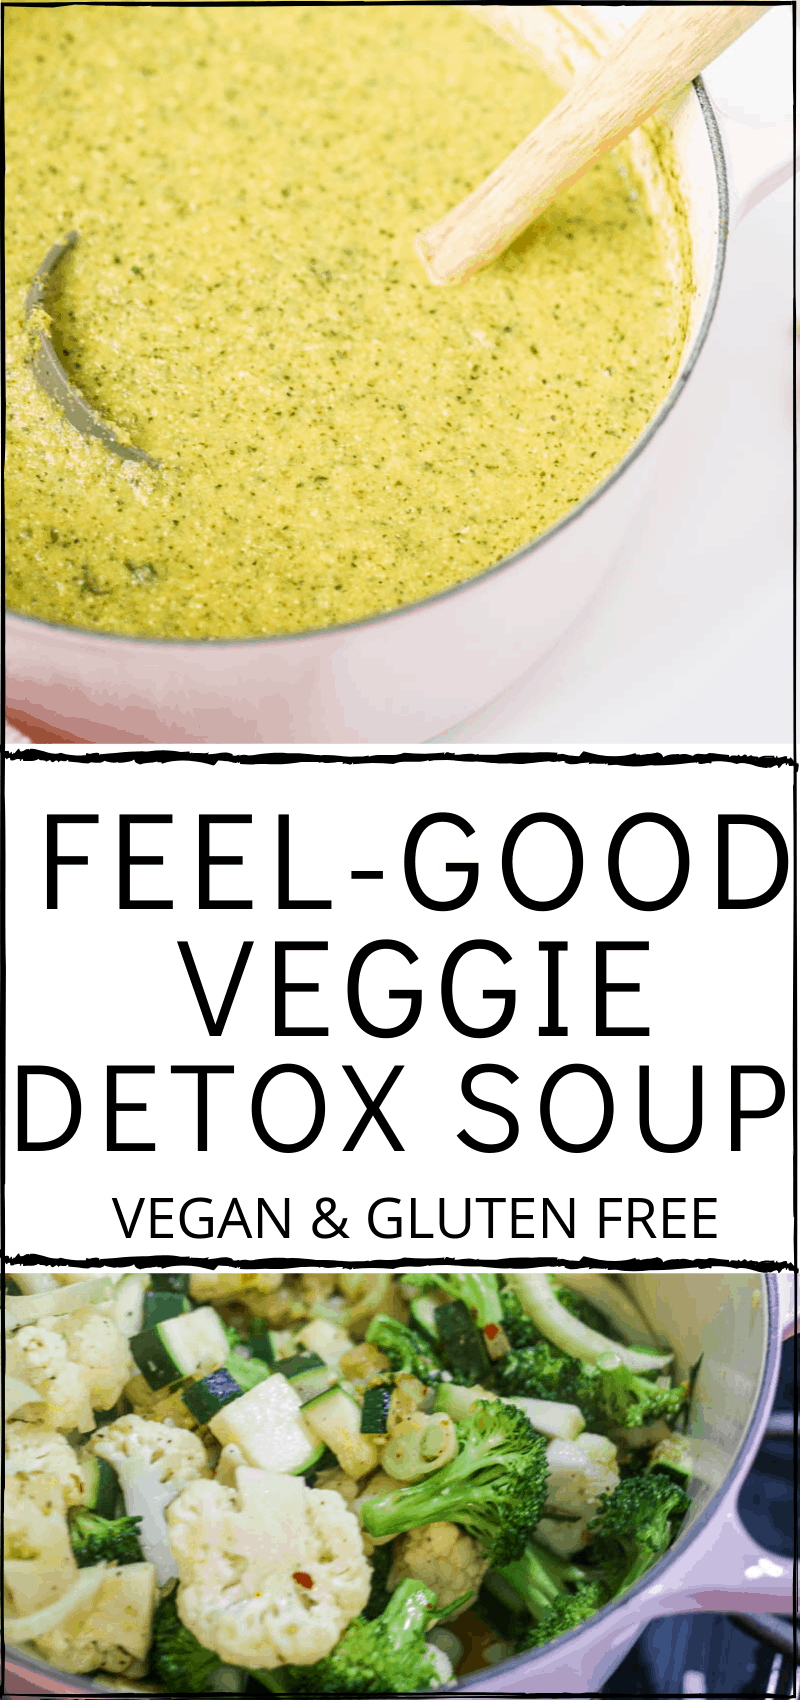 Feel Good Veggie Detox Soup. A one-pot super nourishing and veggie rich recipe that will knock your socks off! With warming spices and fresh herbs. #detox #soup #vegan